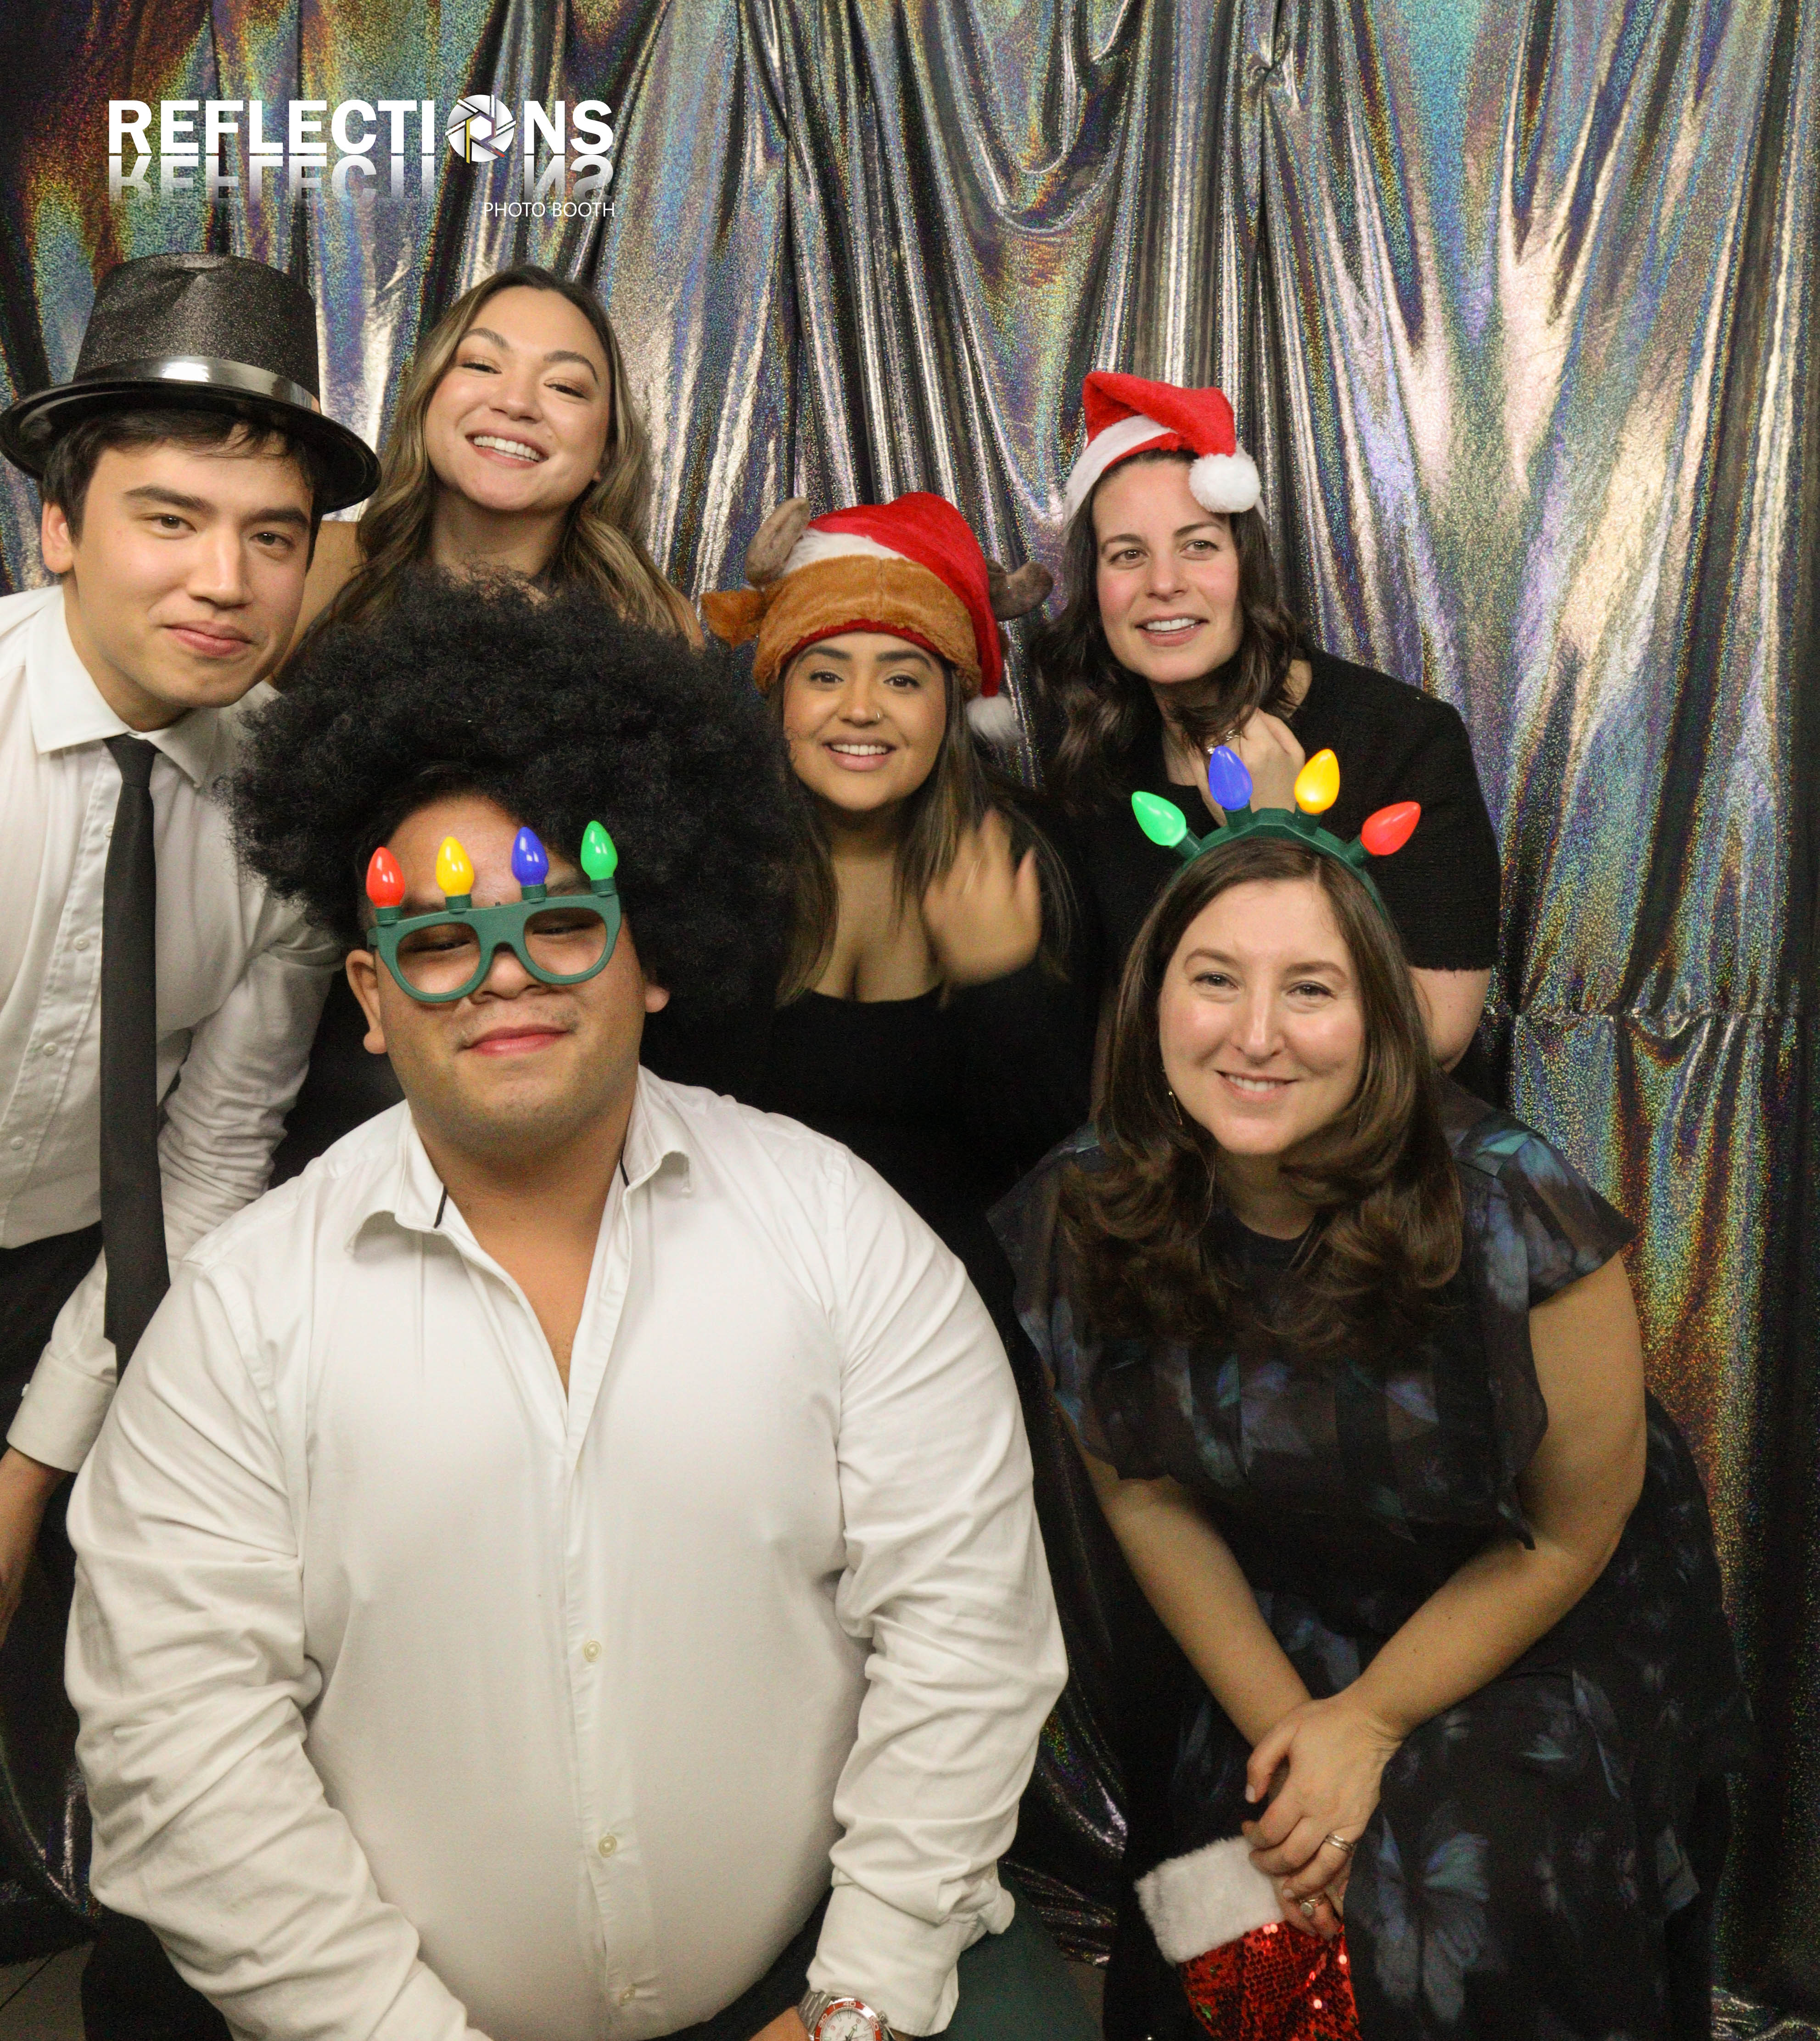 Bell Alliance Xmas Party 2023